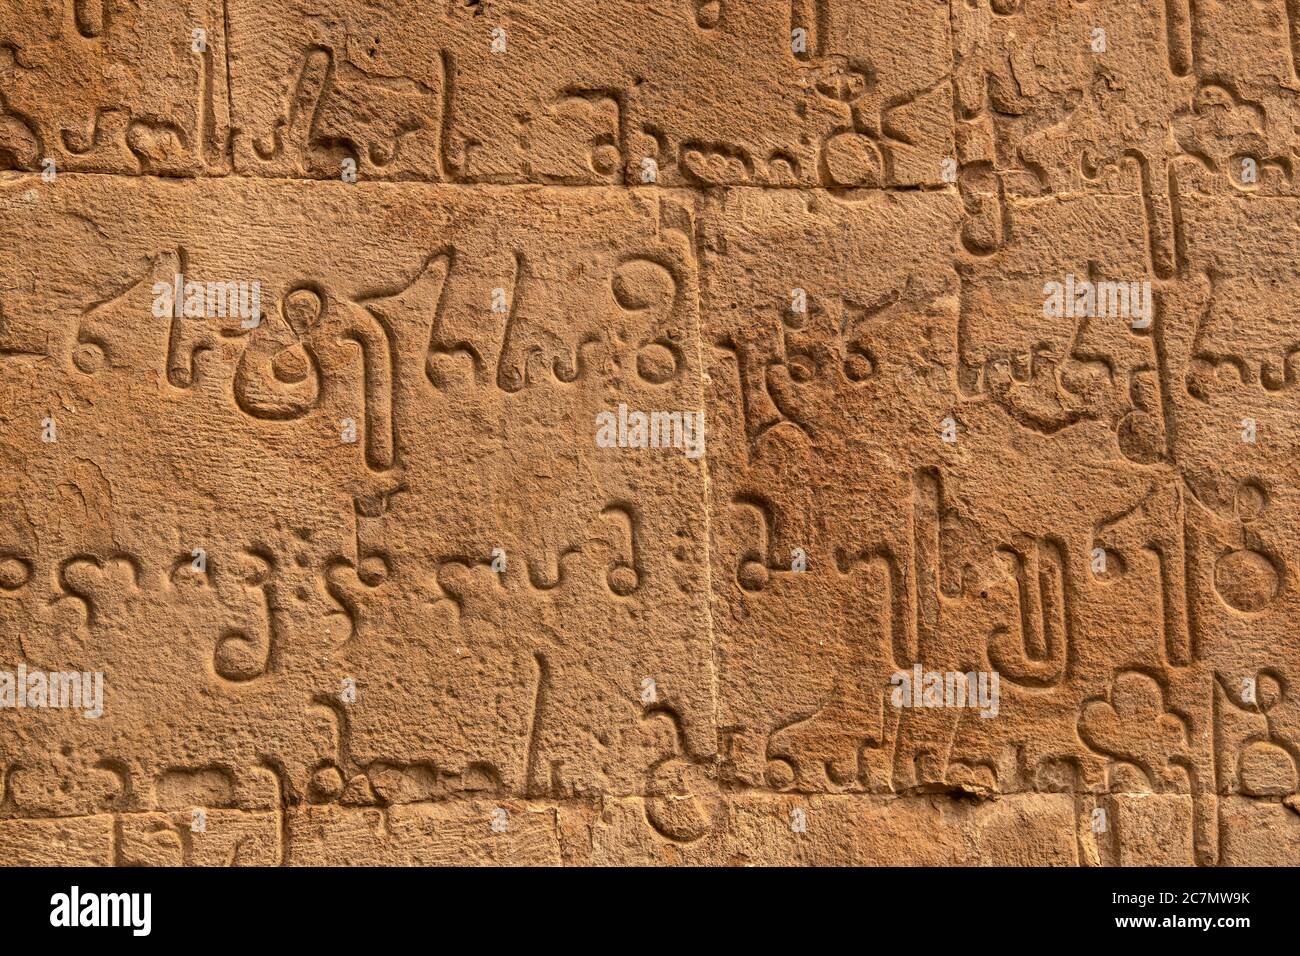 Ancient carving of Mkhedruli alphabet developed between the 11th and 13th centuries - official language of Georgia Stock Photo